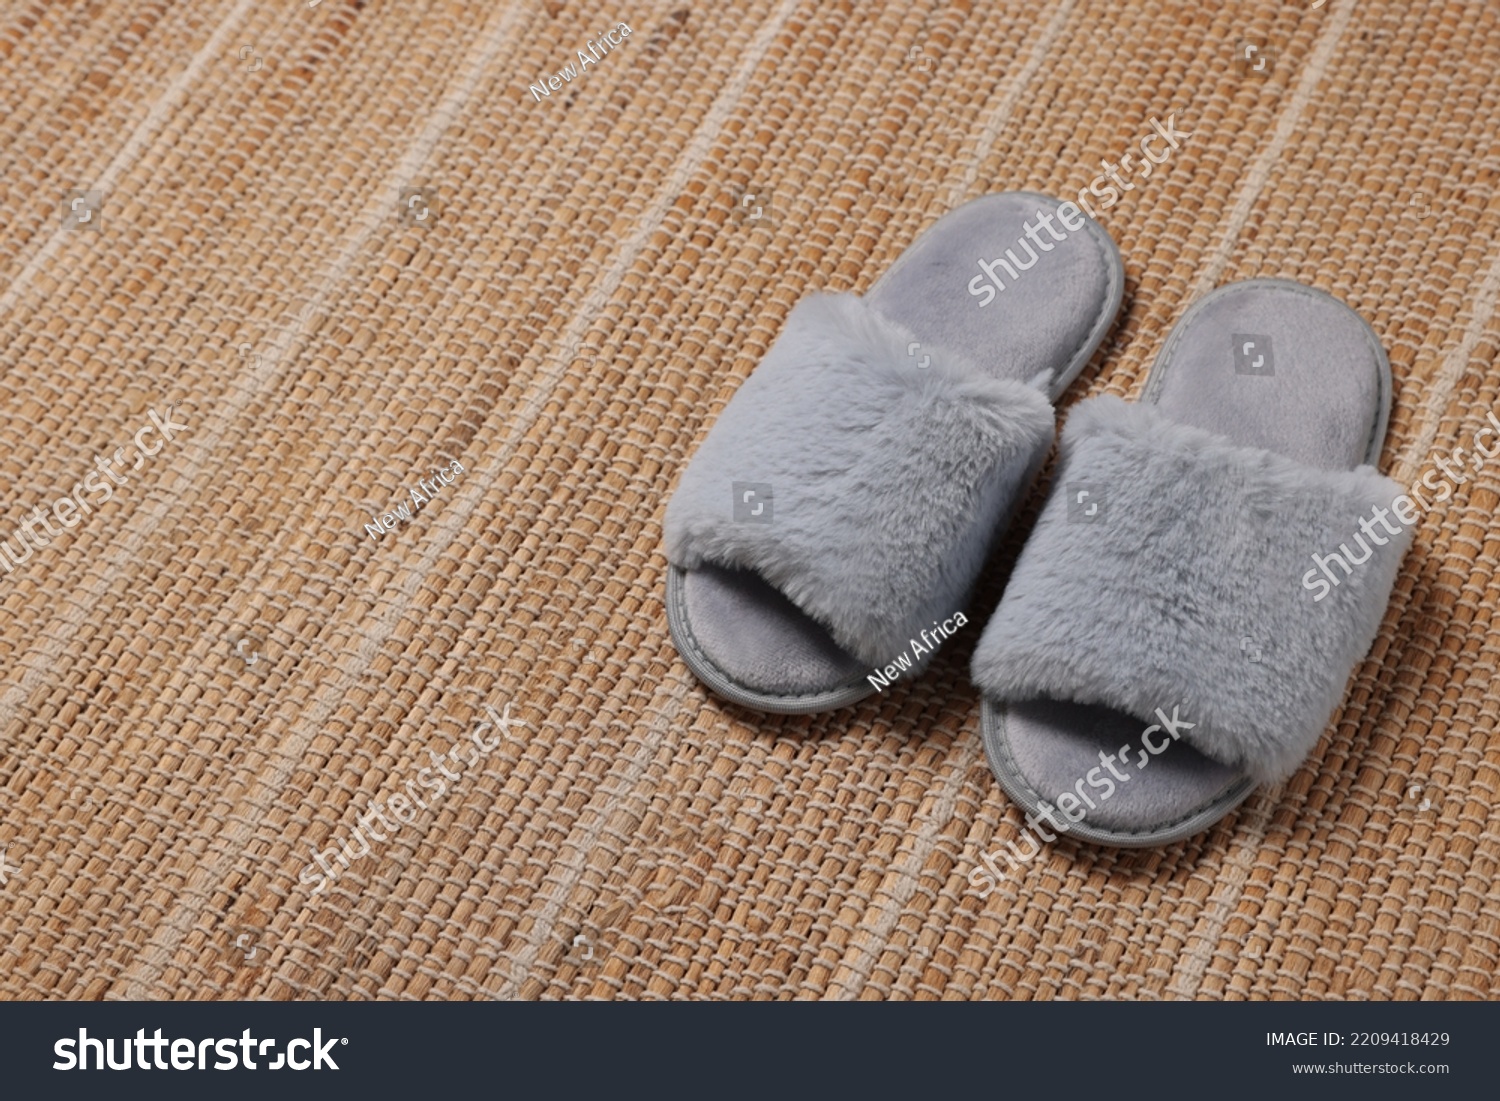 Soft fluffy grey slippers on carpet, space for text #2209418429